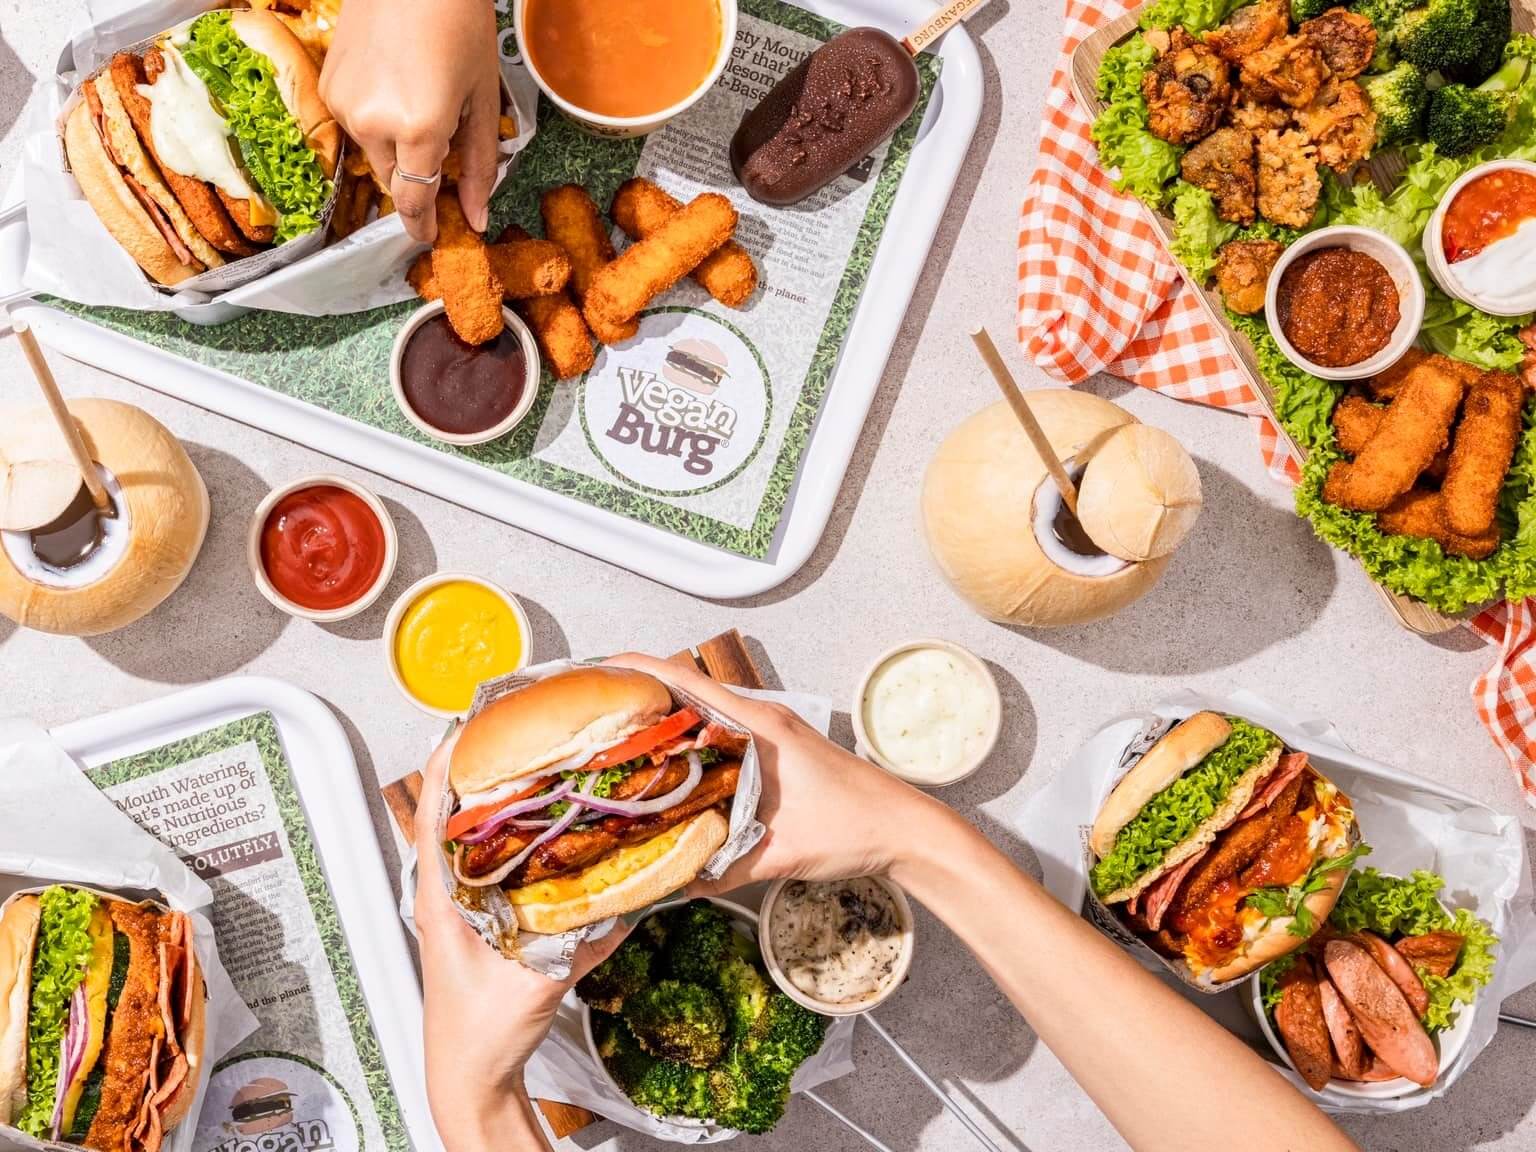 20 plant-based food places you should check out